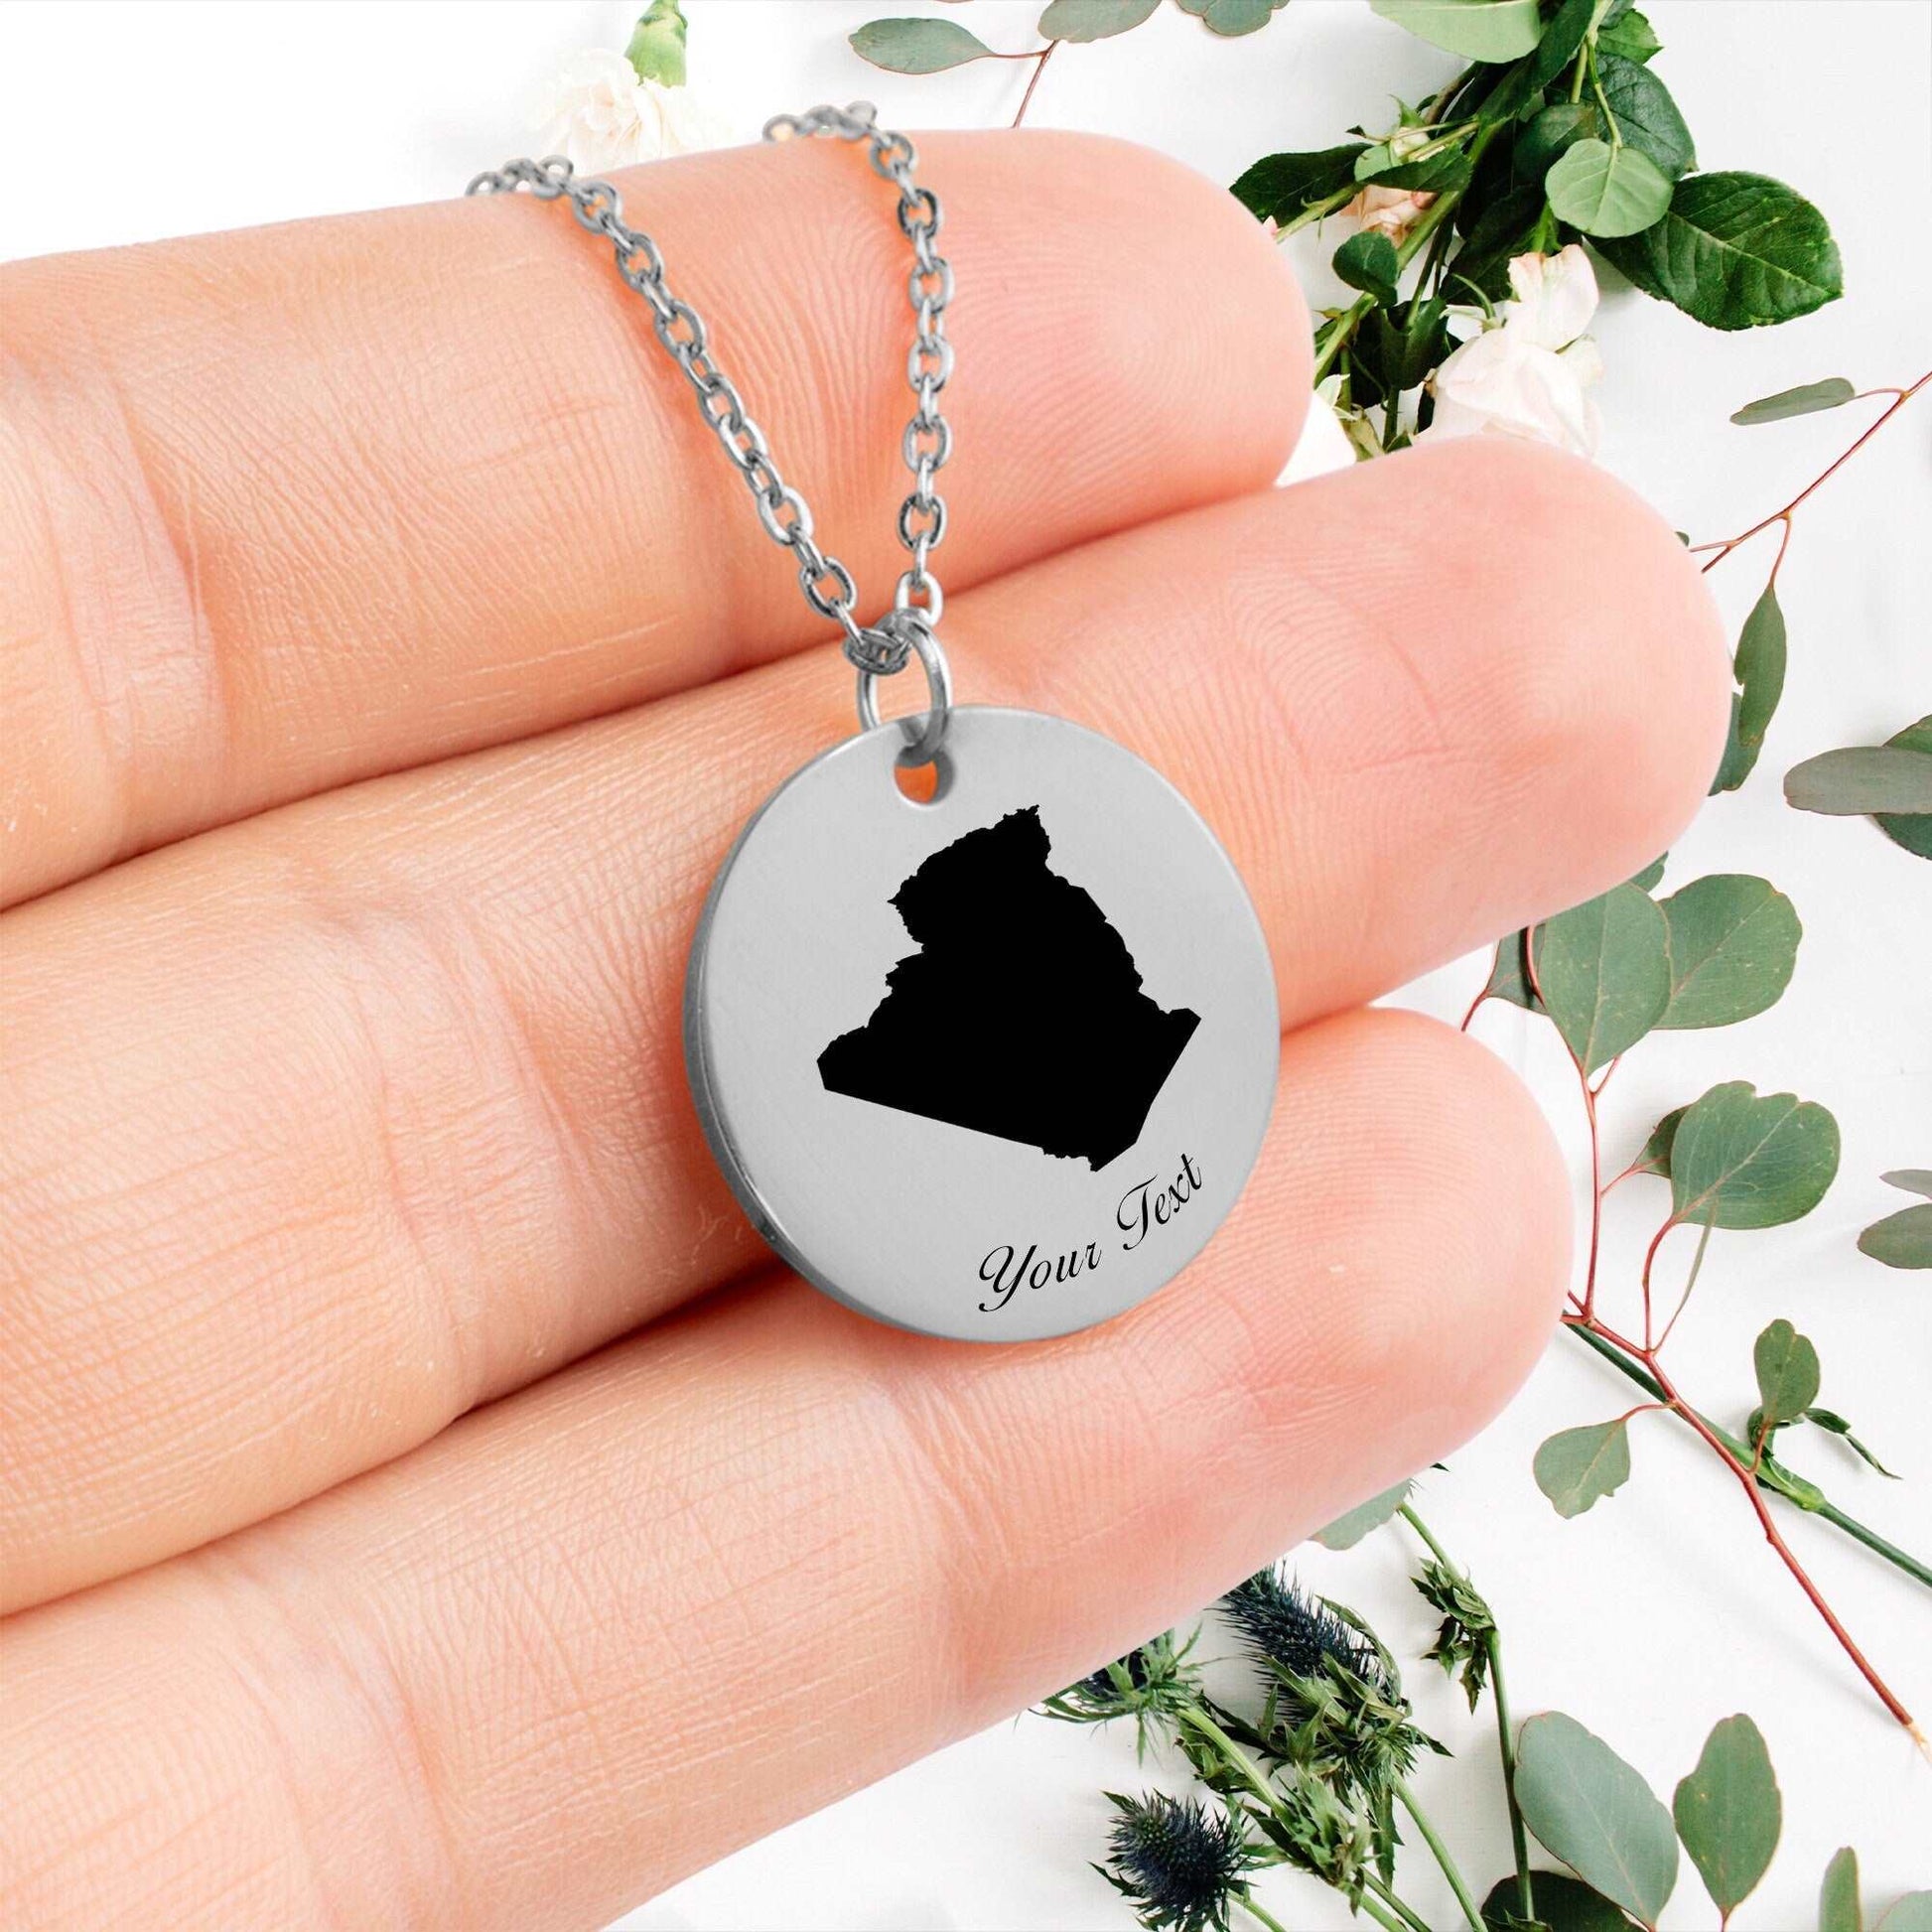 Algeria Country Map Necklace, Your Name Necklace, Minimalist Necklace, Personalized Gift, Silver Necklace, Gift For Him Her